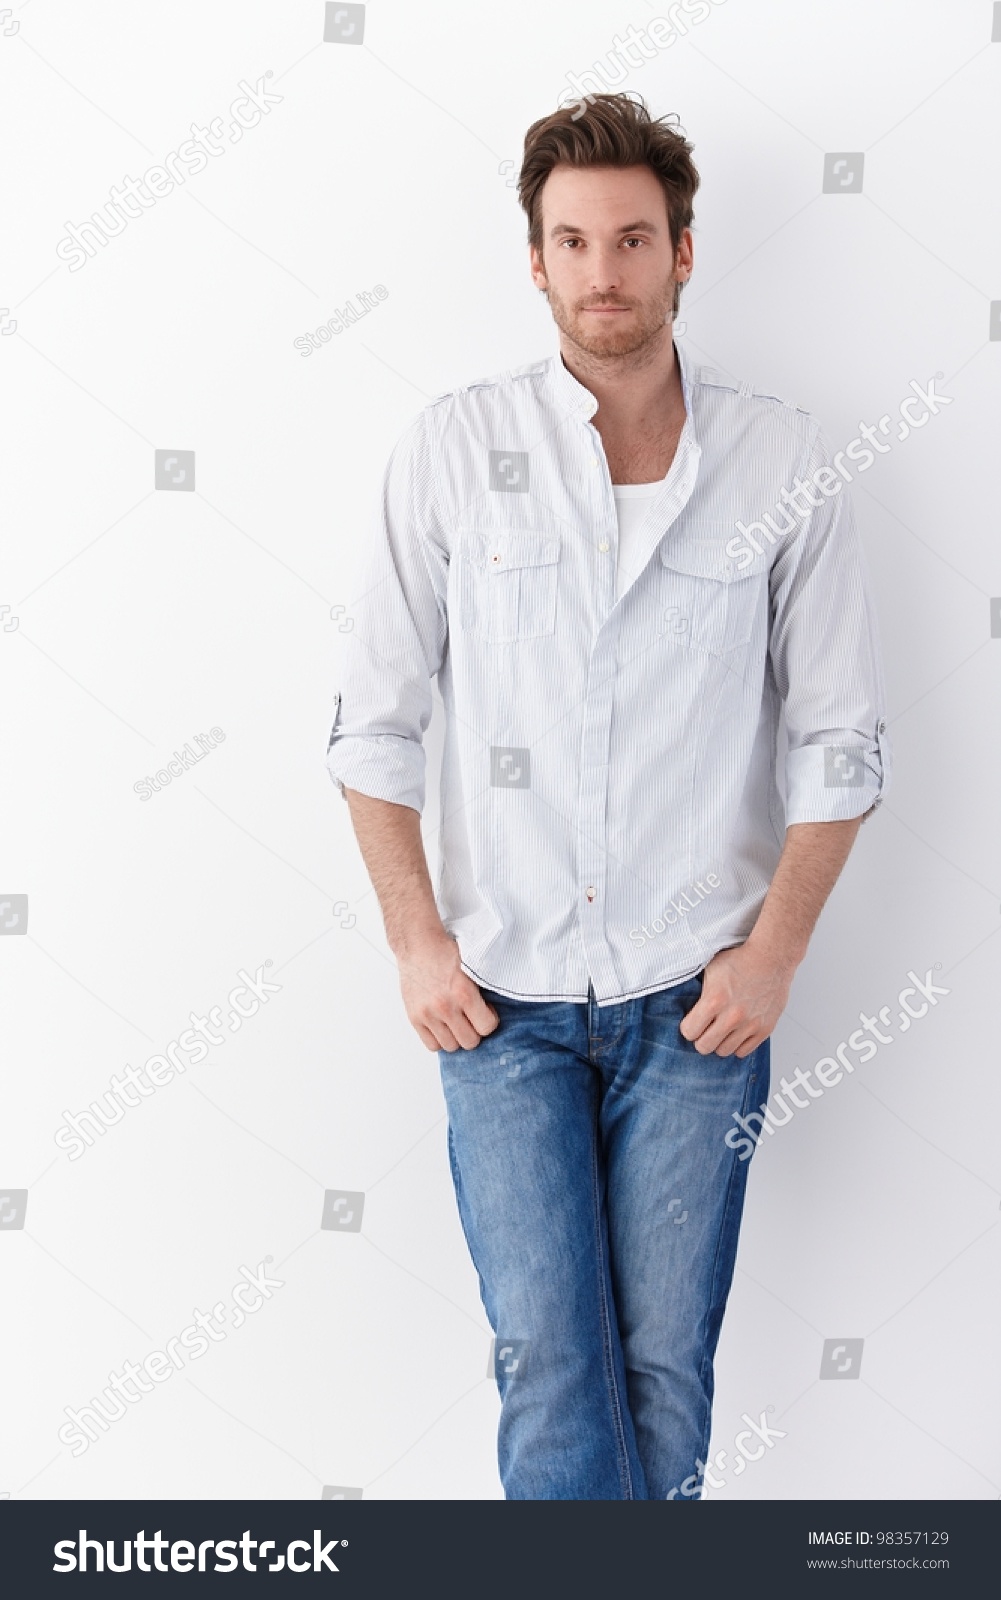 Handsome Young Man Standing Over White Stock Photo 98357129 - Shutterstock